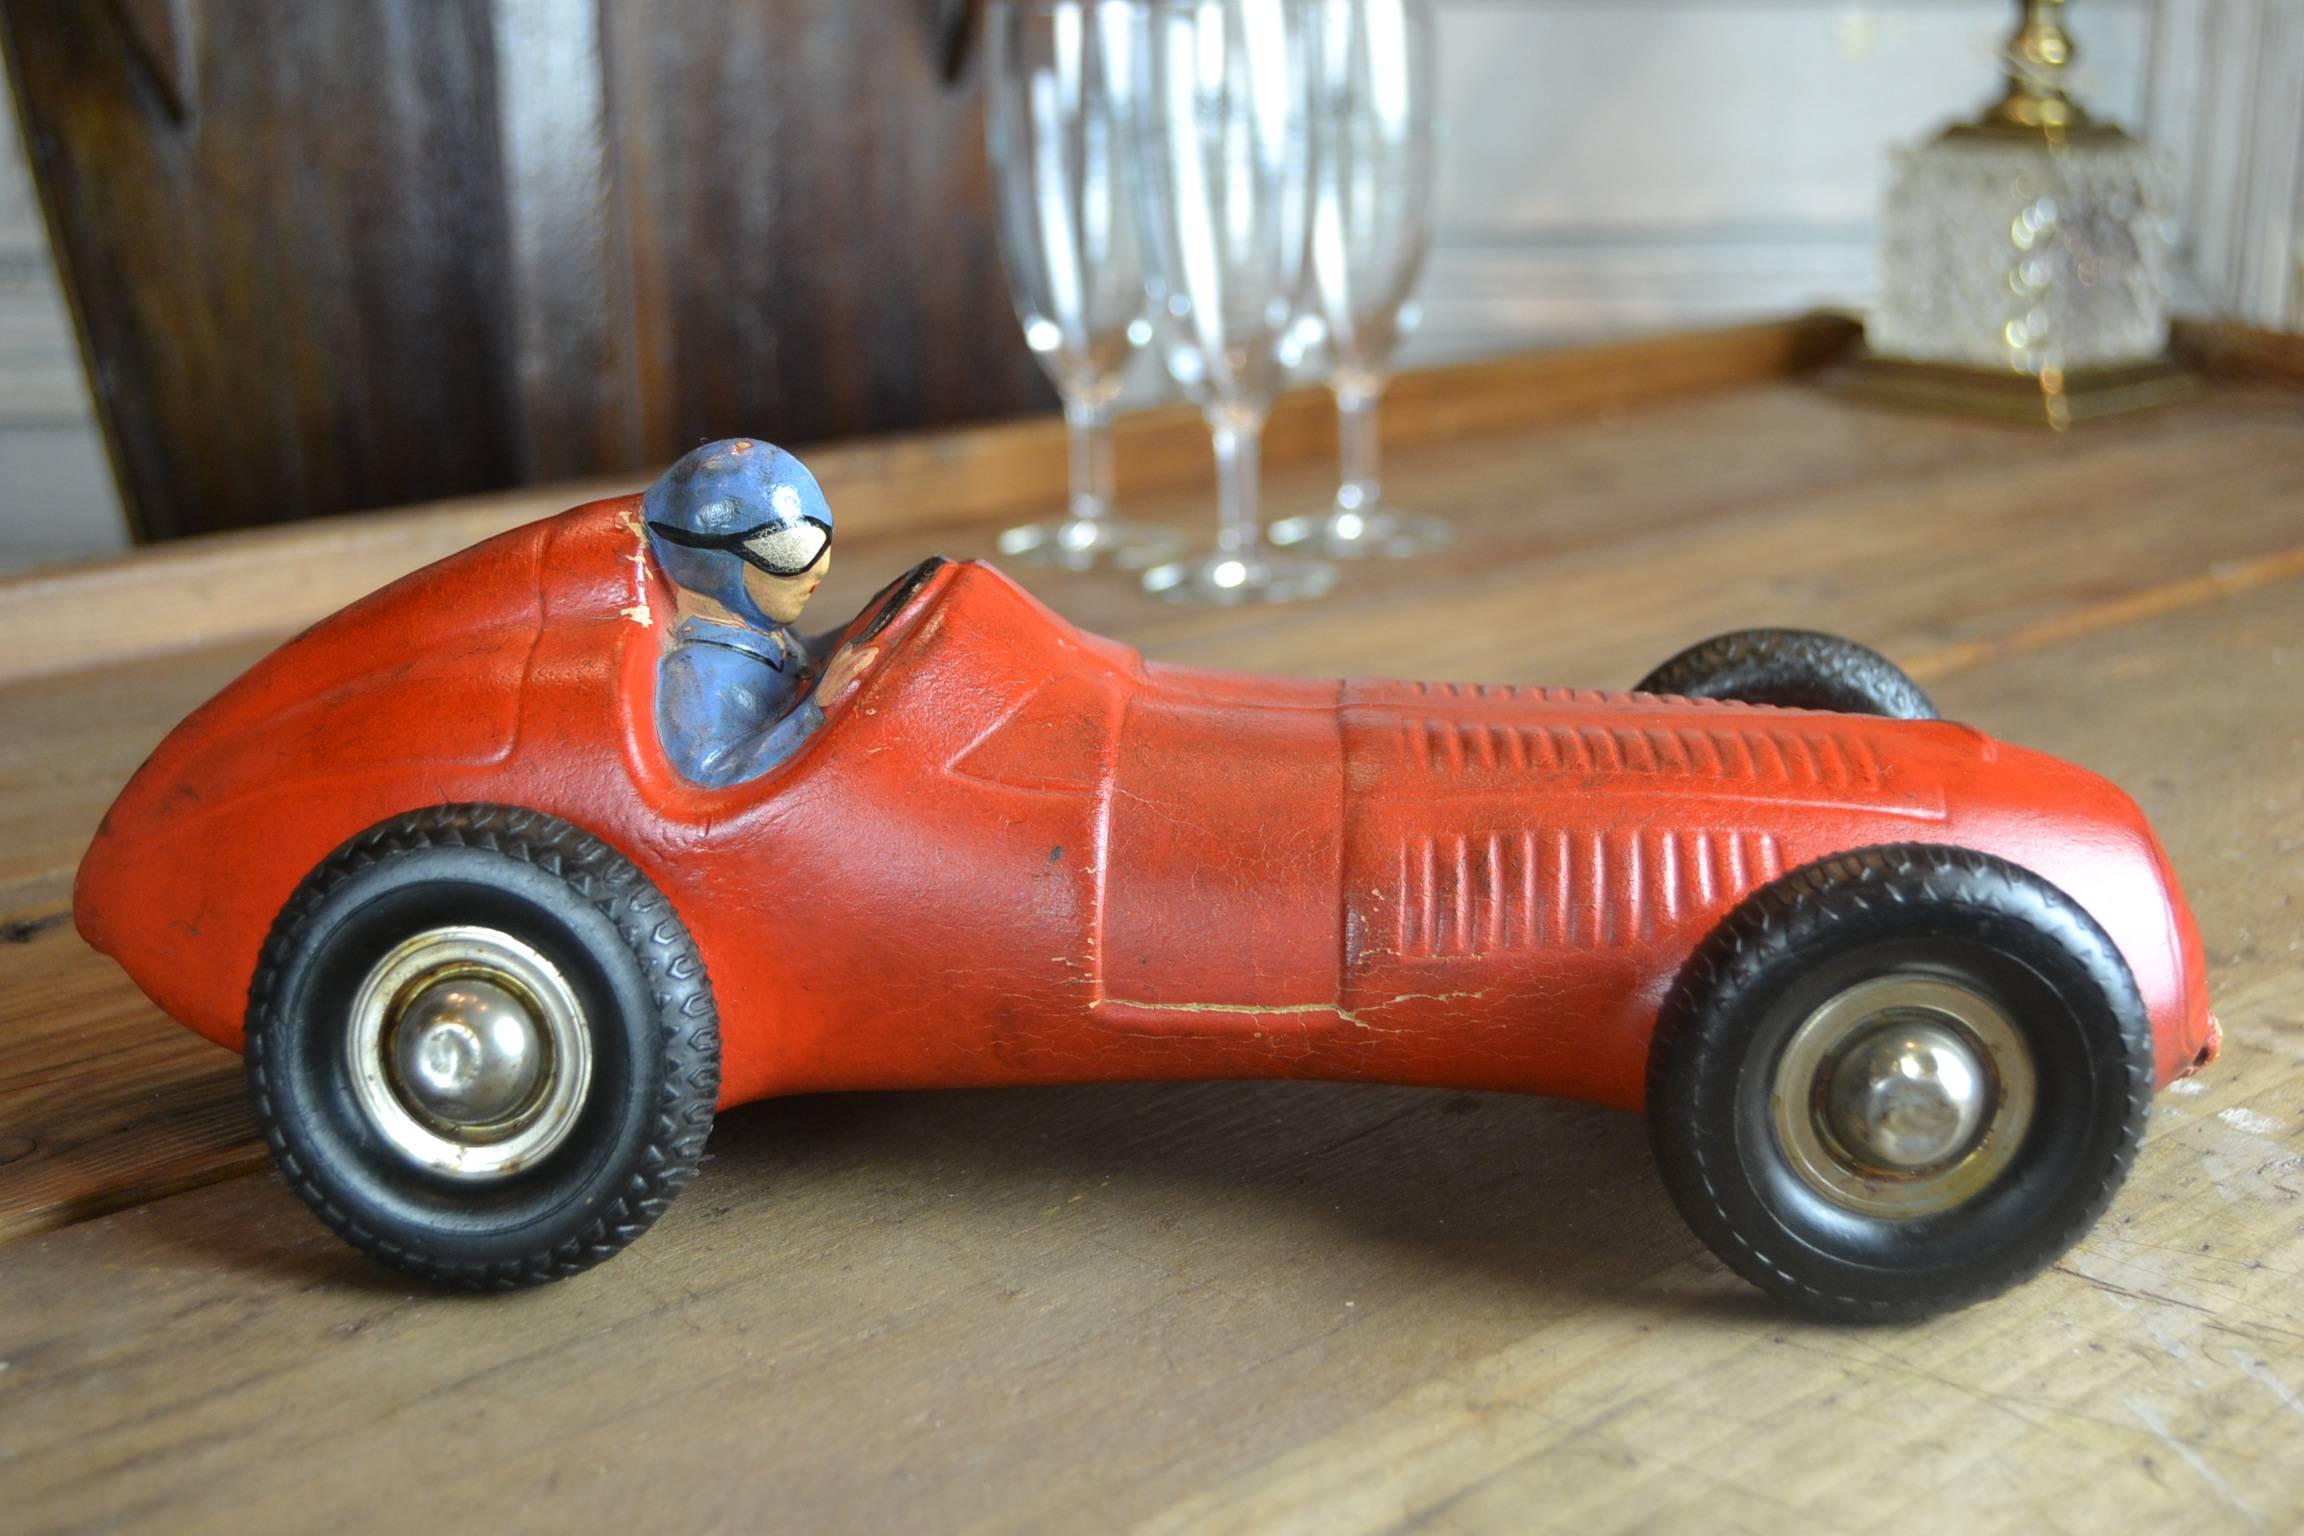 Thick Red Rubber Racing Toy Car - Racer Model Car . 
This Racer Car with Pilot dates circa 1940s.
Type : Ferrari - Maserati - Mercedes-Benz Race Car.
Black rubber Tires with Metal Hubs ( 1 is lost ).
Great old Patina . 

Stunning collectible Object